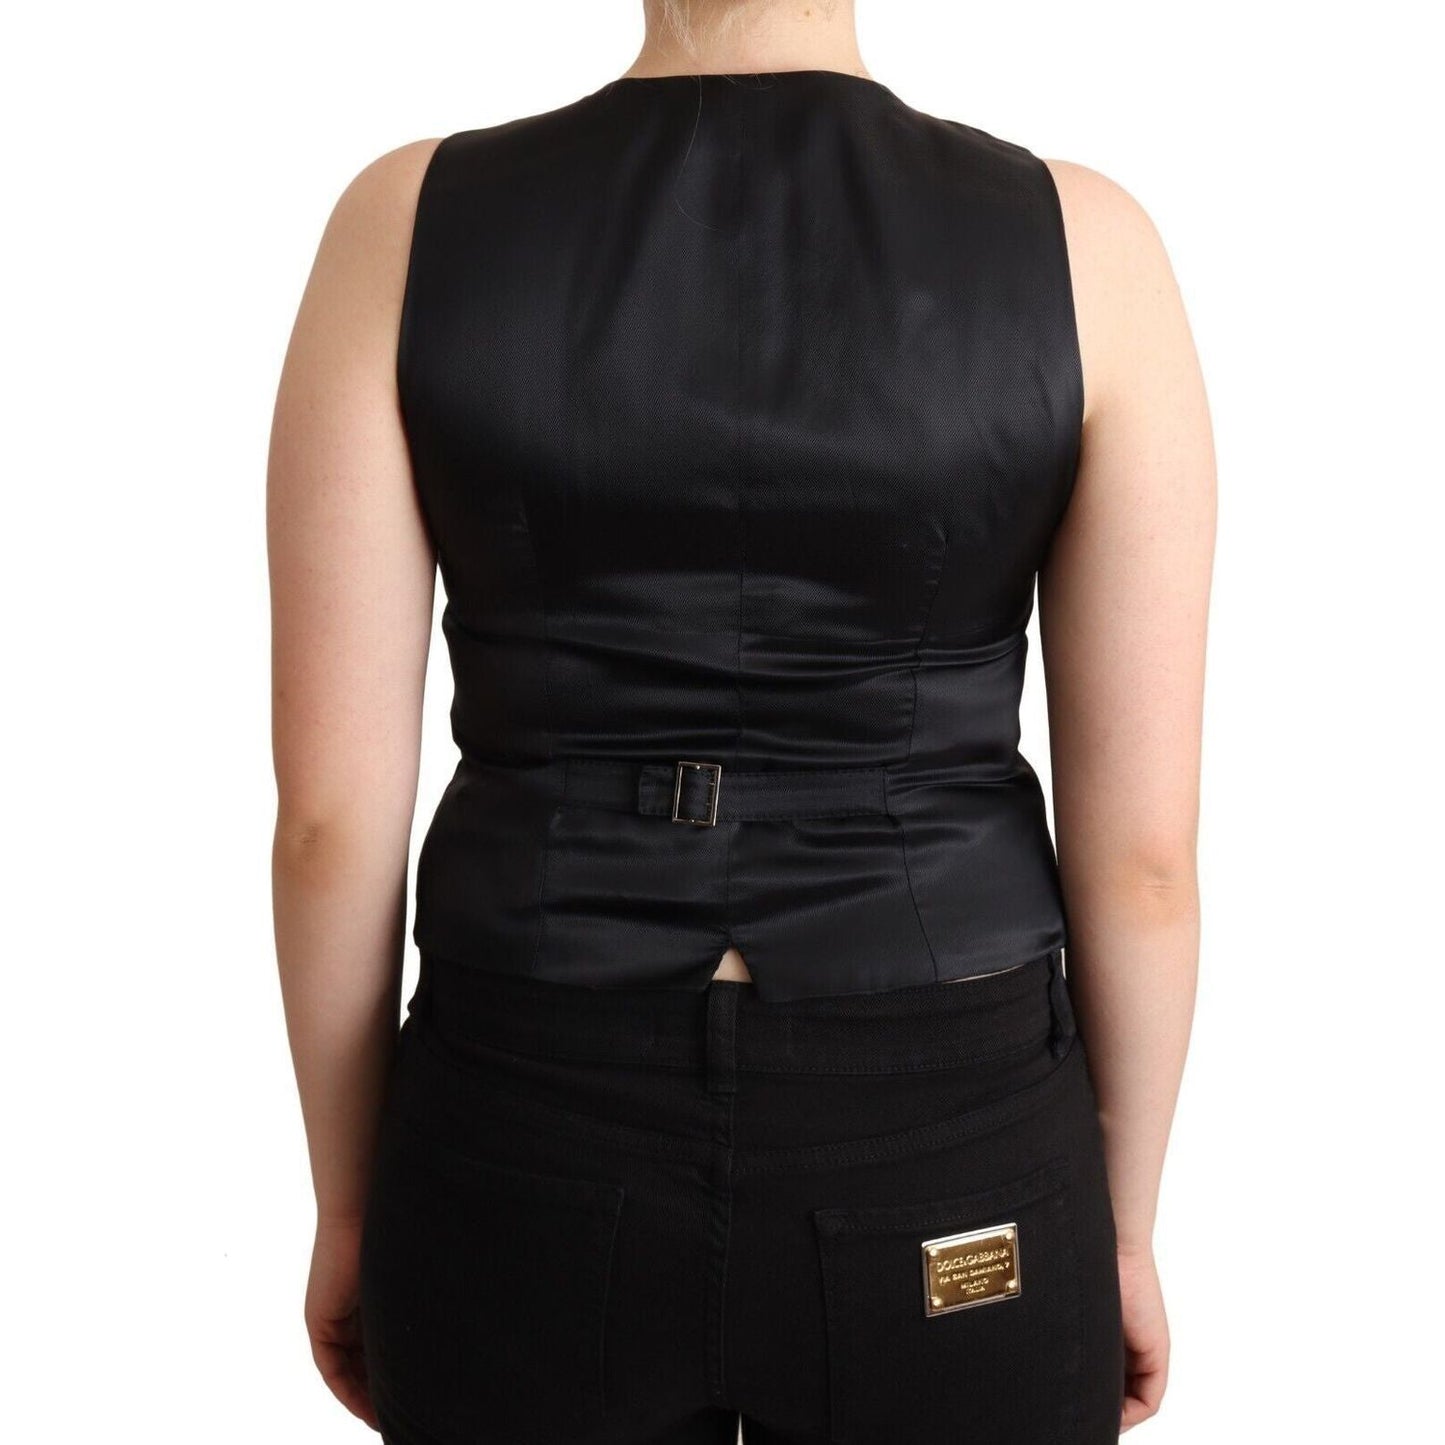 Dolce & Gabbana Elegant Black Vest Top with Button Detail WOMAN TOPS AND SHIRTS black-button-down-sleeveless-viscose-vest-top